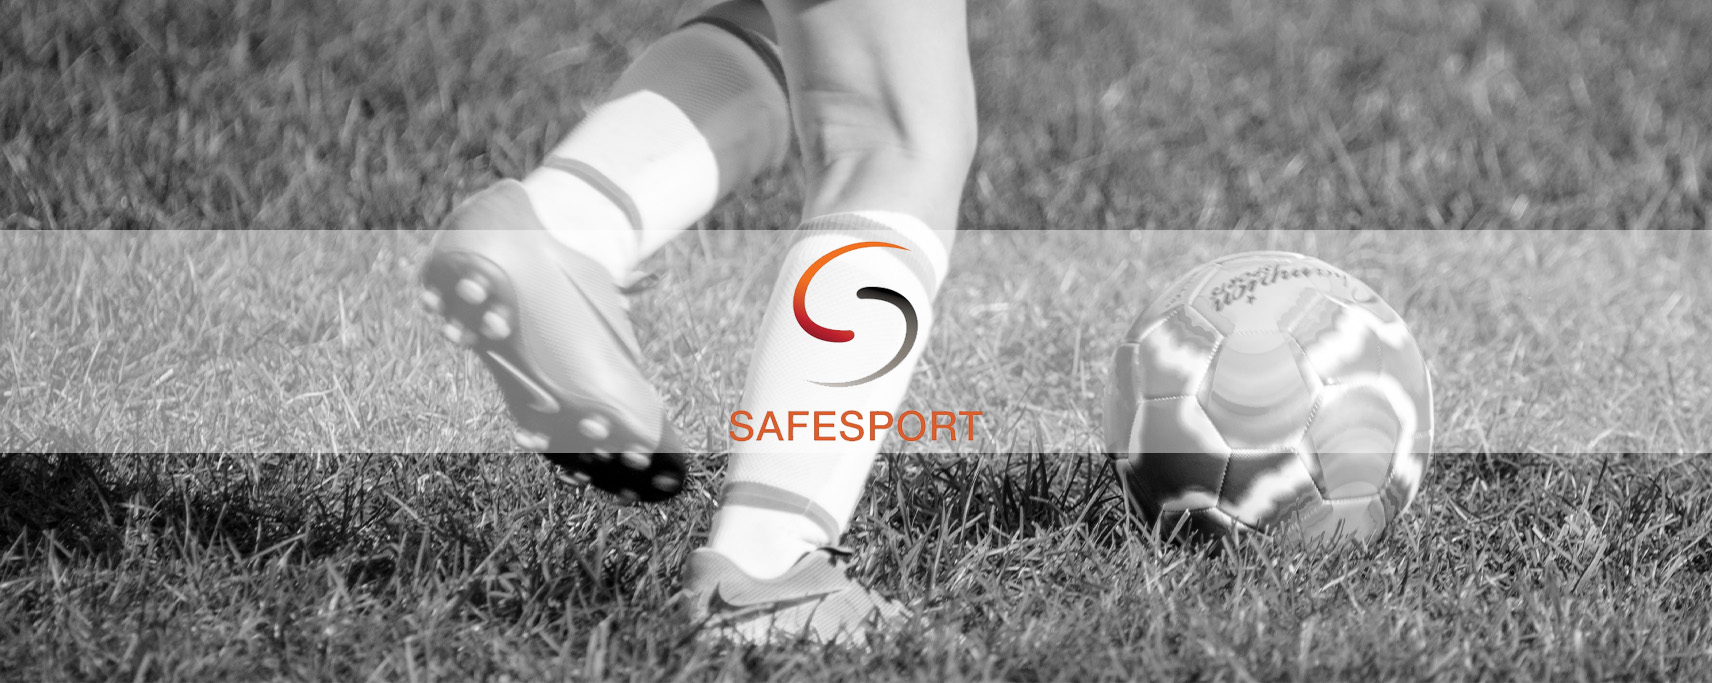 LIJSL Taking Proactive Approach in Further Educating Member Clubs on Safesport